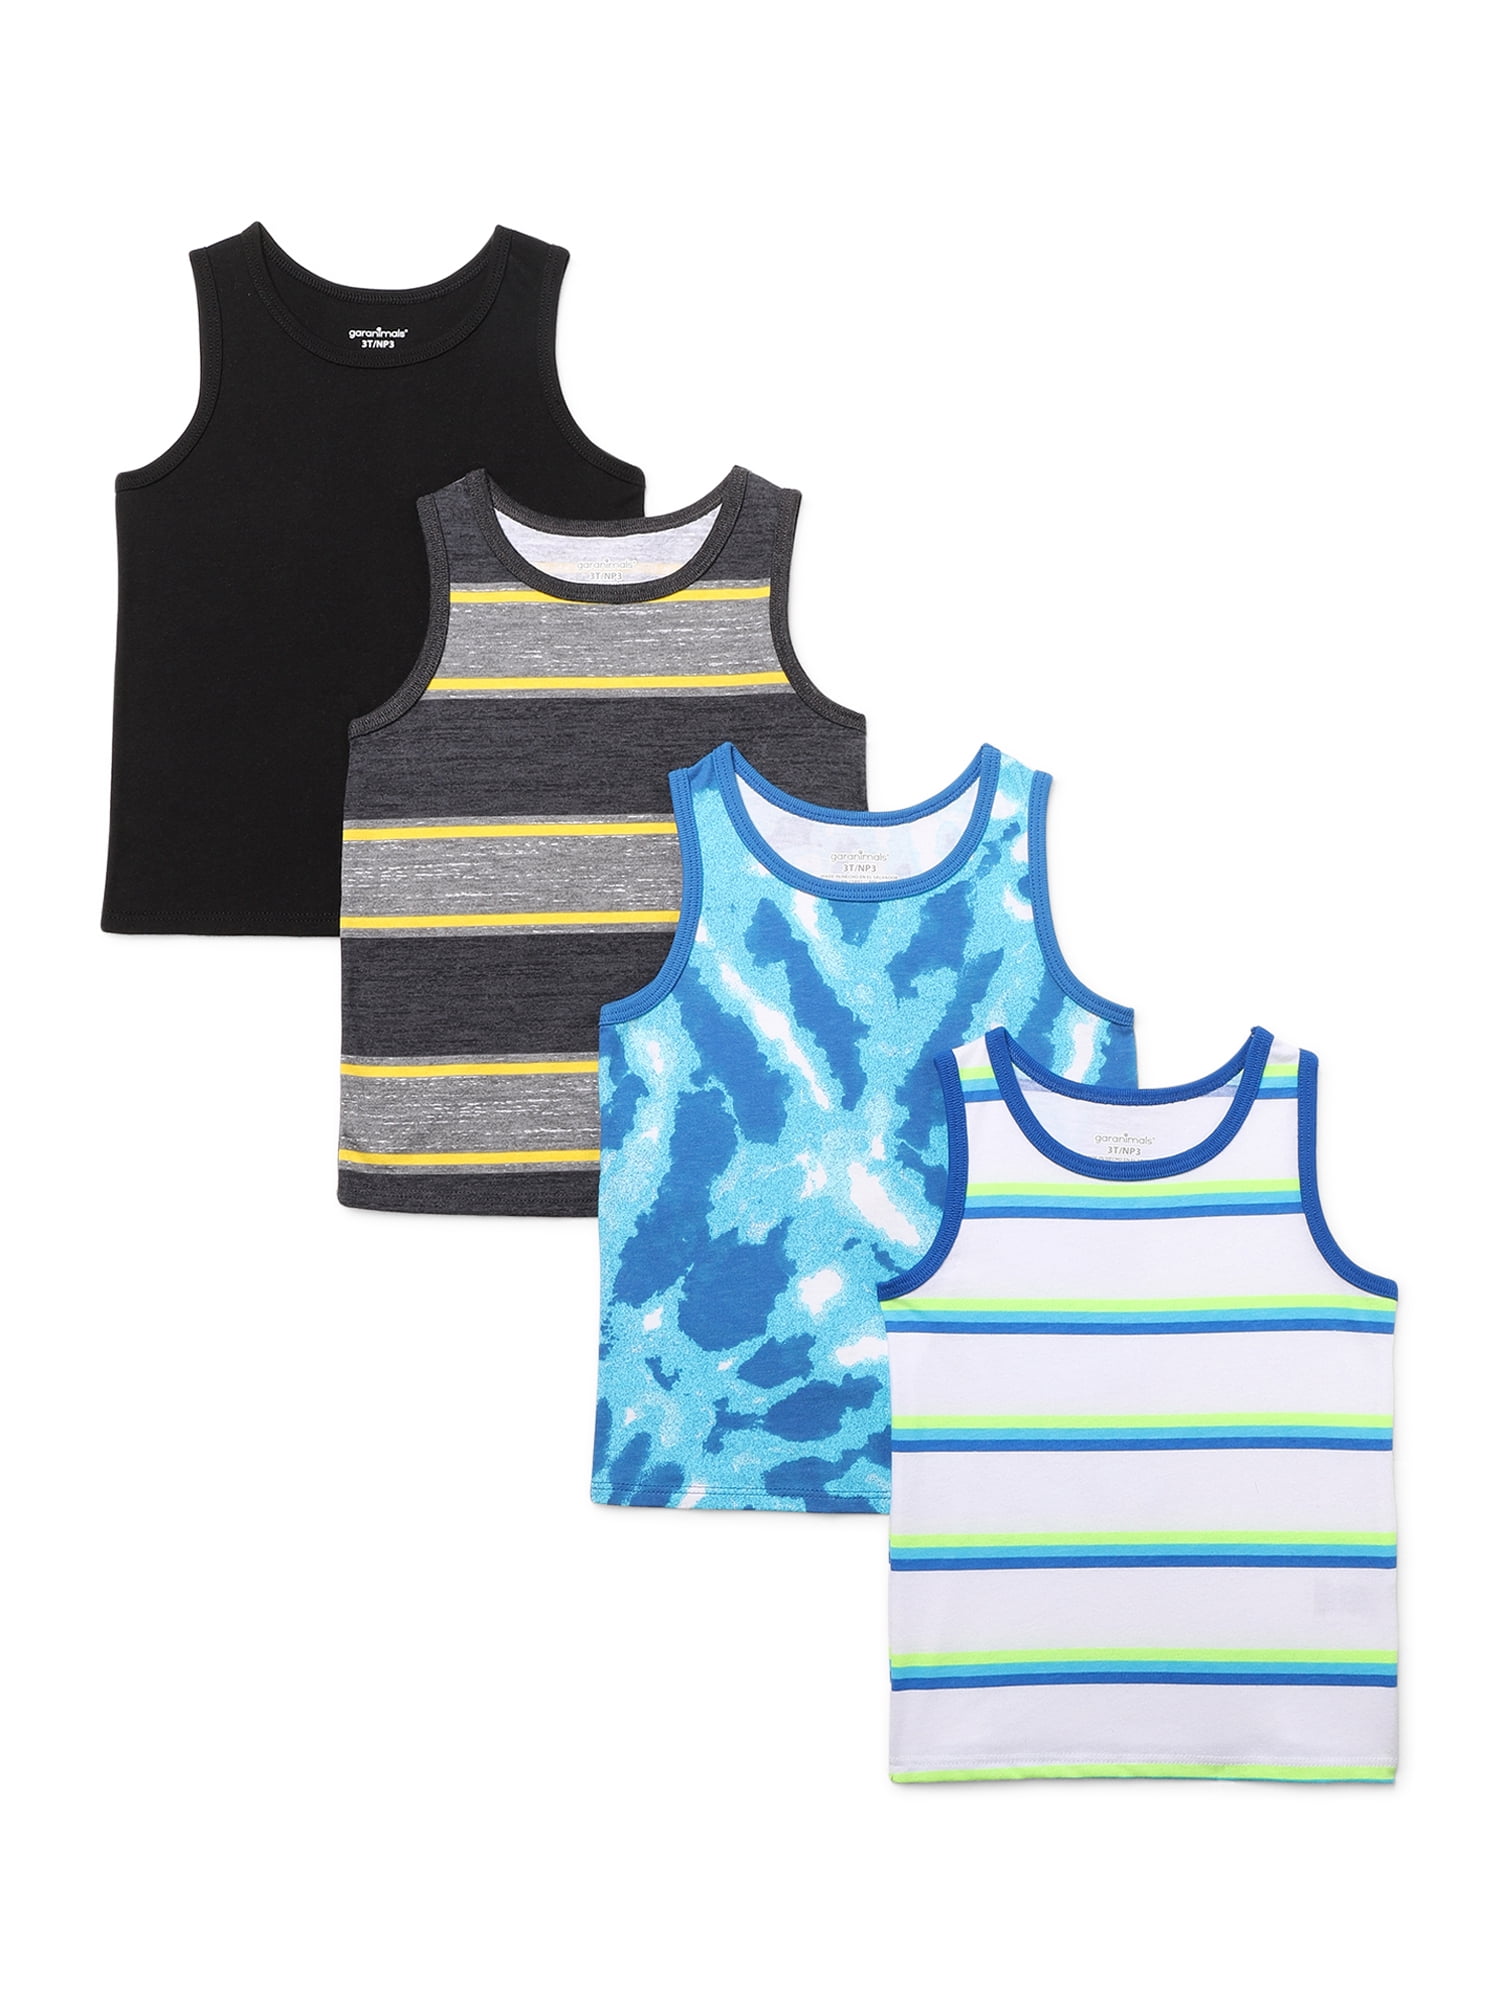 VeaRin Toddler Boys Tank Tops Solid Colors 3 Pack 